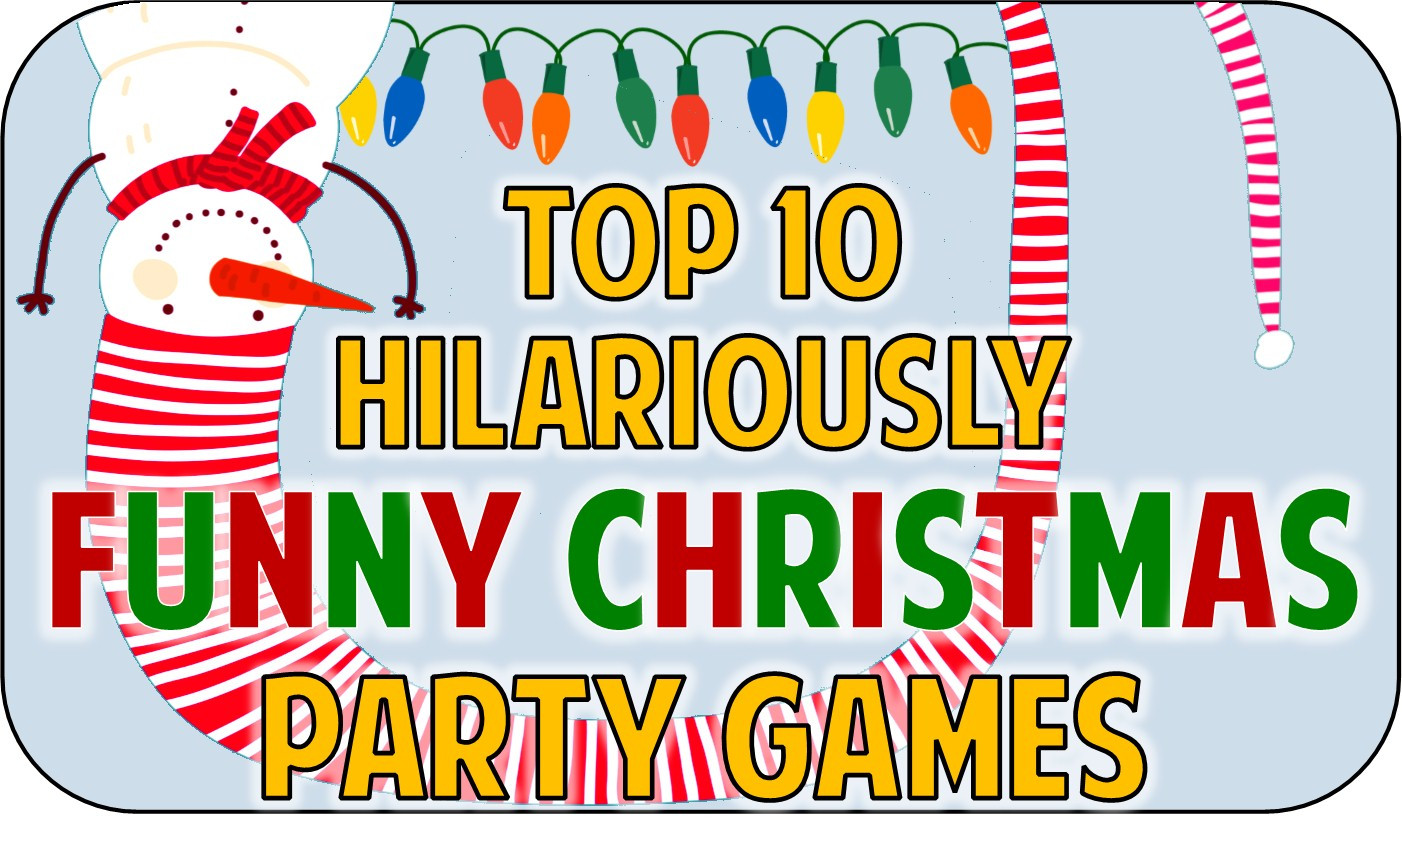 Fun Office Christmas Party Ideas
 Christmas Party fice Games